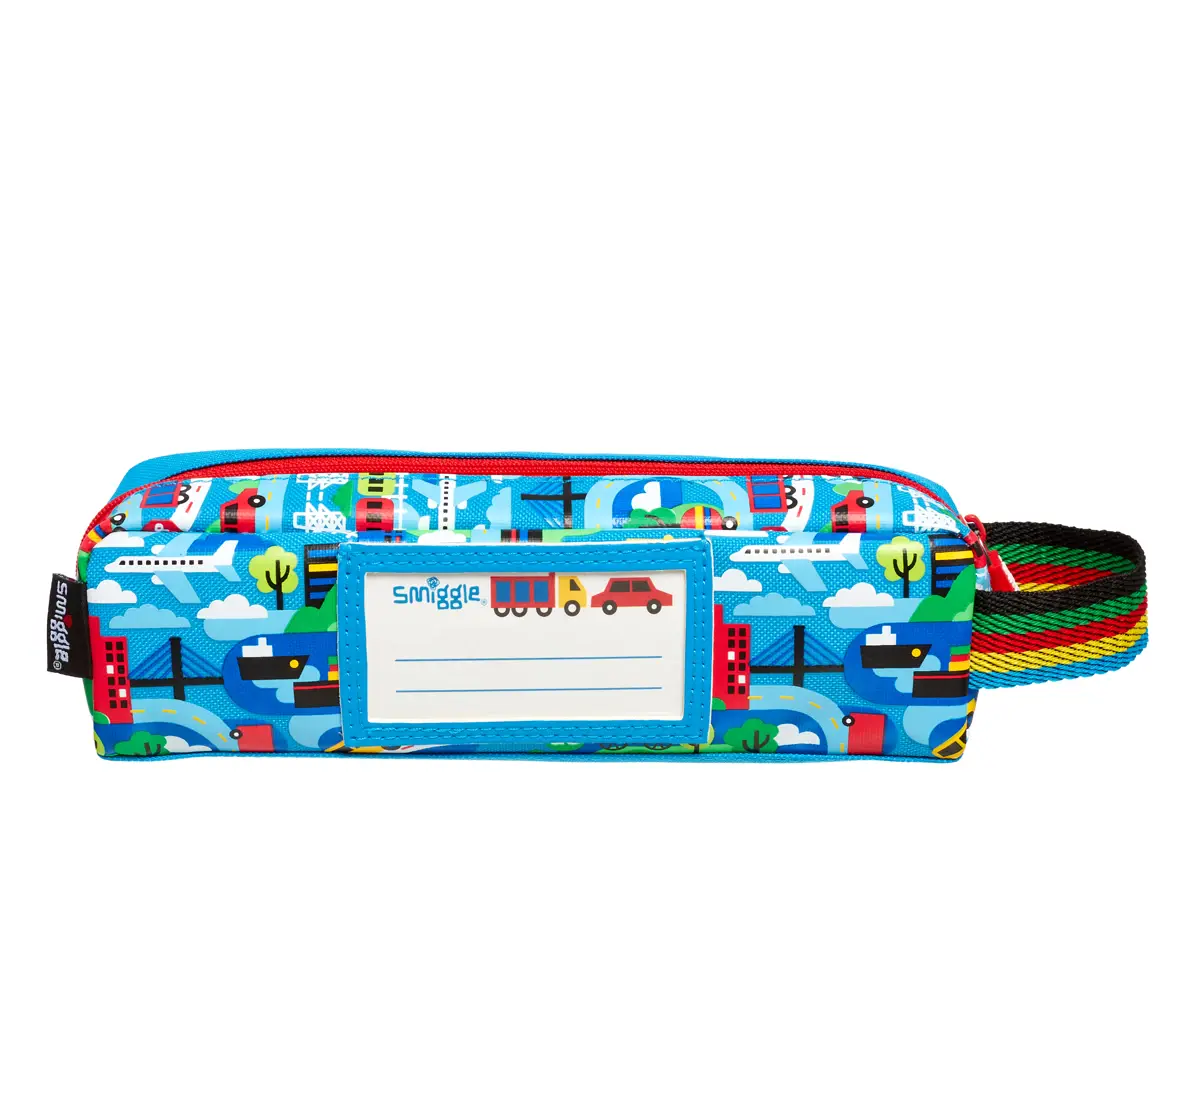 Smiggle Round About Teeny Tiny Pencil Case, Medium, Blue, 3Y+